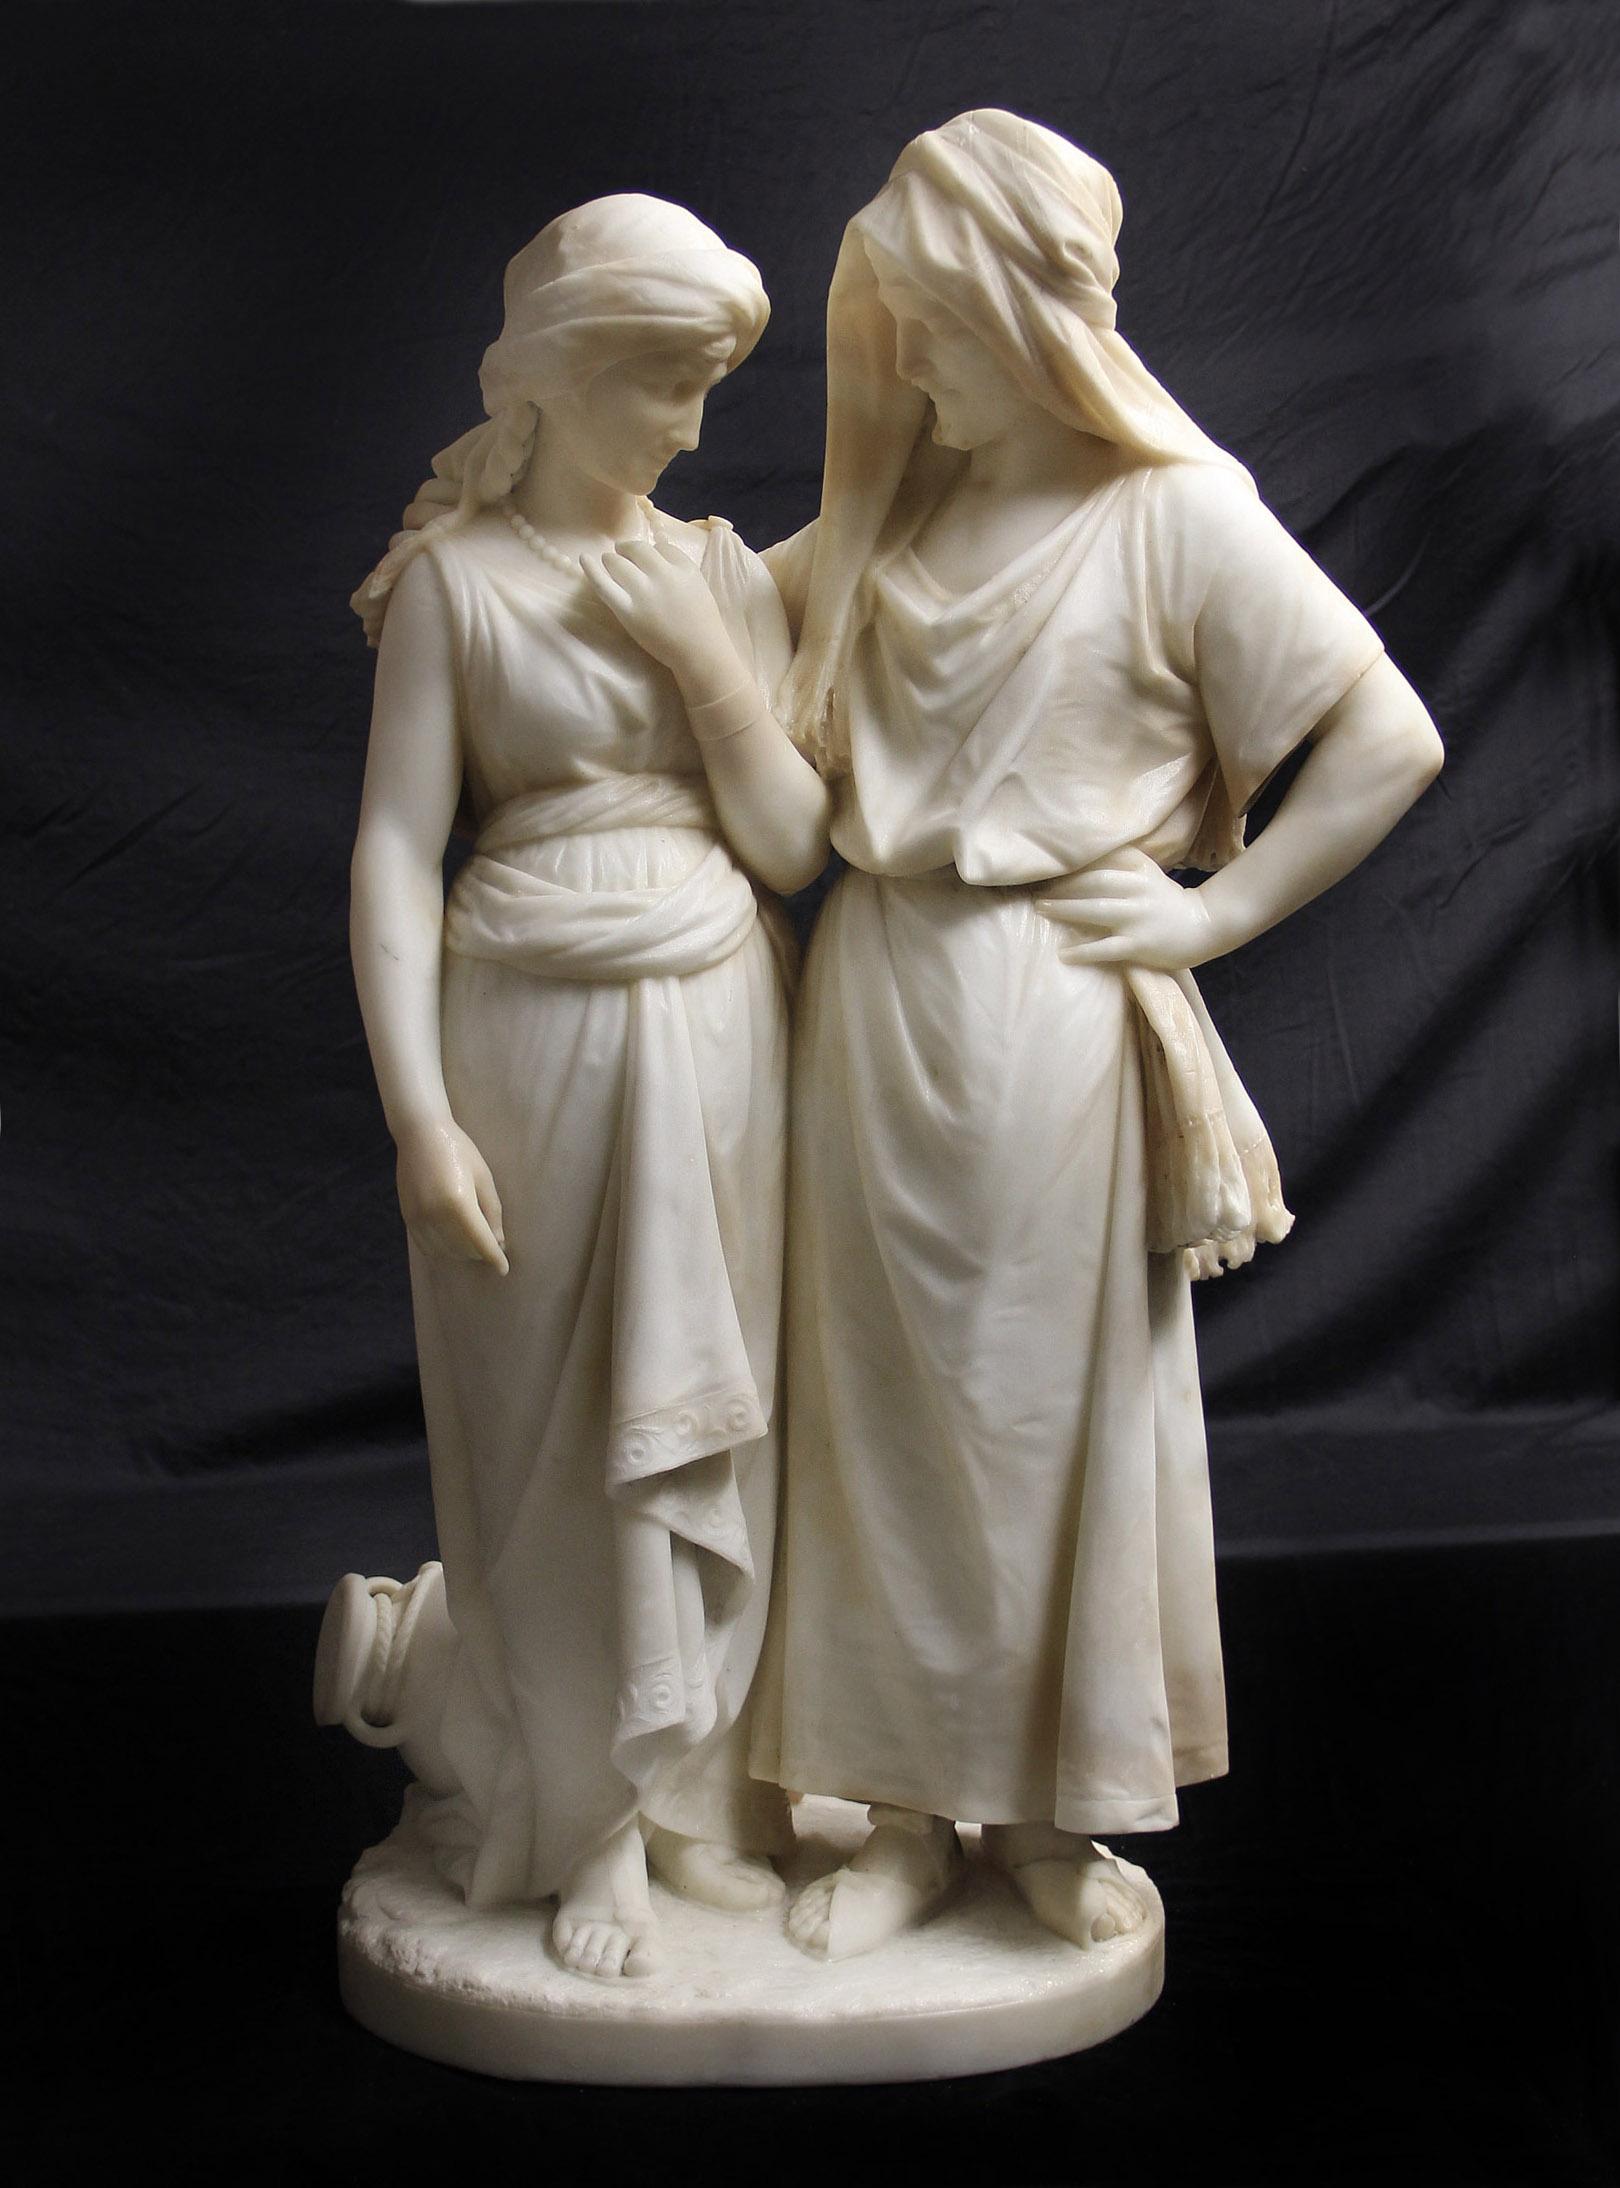 A Fine Late 19th Century White Carrara Double Figure Marble Entitled “Tendresse” by Émile-André Boisseau

Depicting an early Middle Eastern couple, the man with his arm around his wife, comforting her, standing on a oval carved base with a water